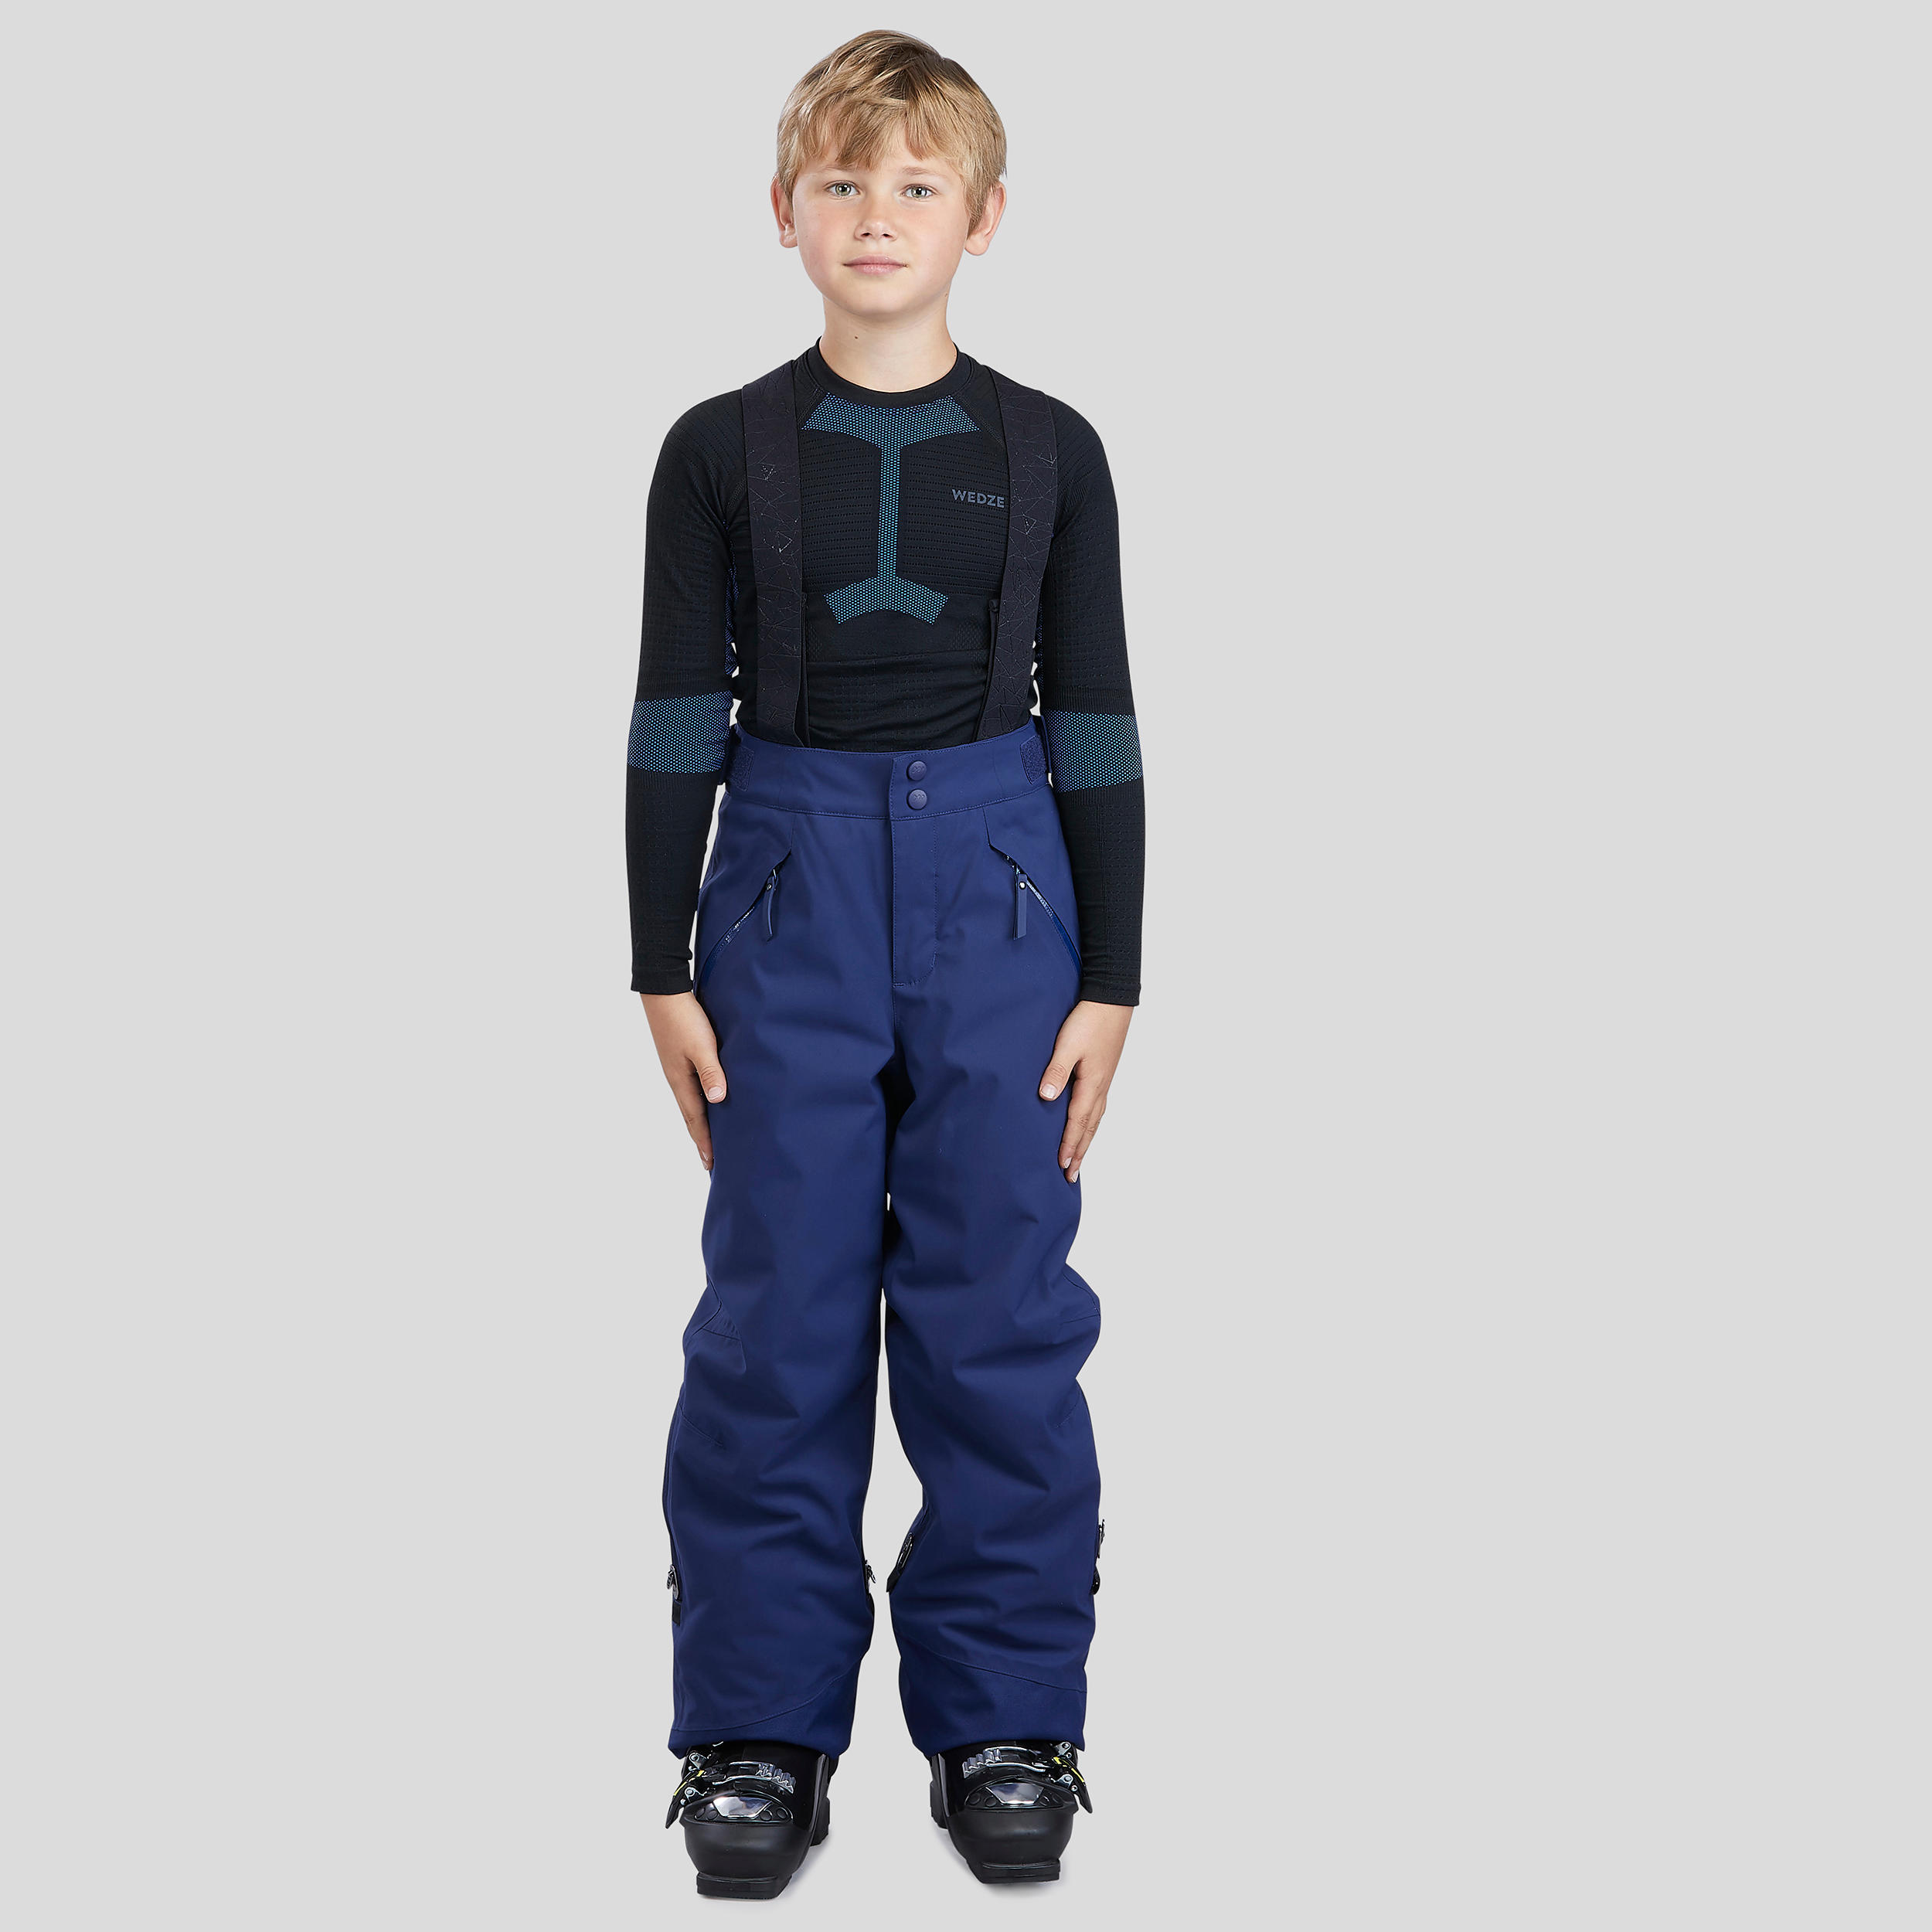 Kids' Ski Pants with Removable Straps - PNF 900 Blue - Galaxy blue